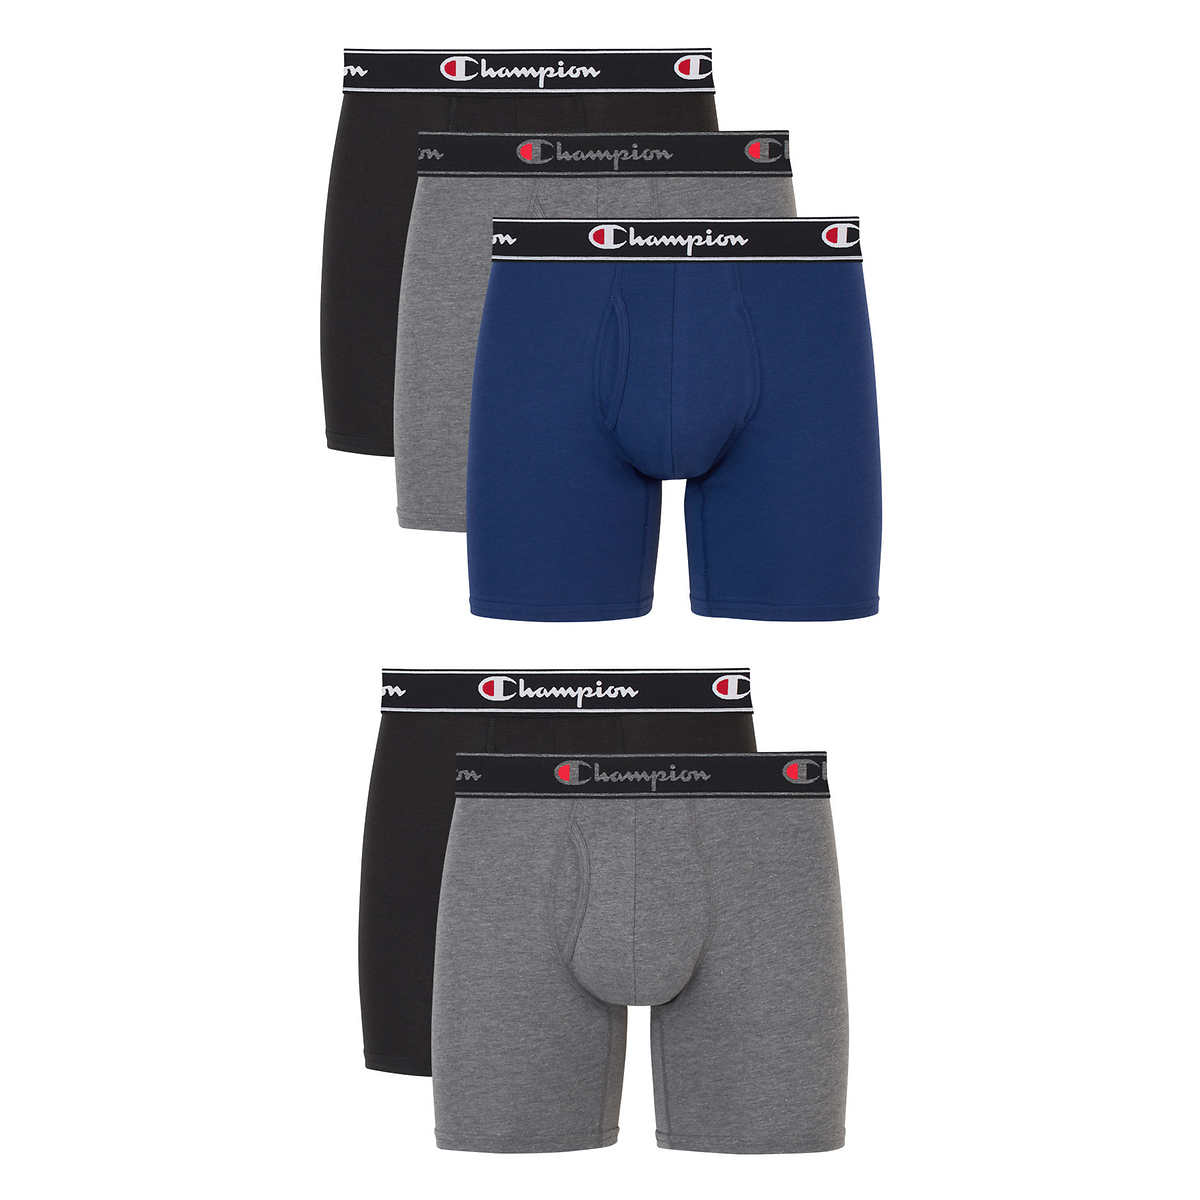 Champion Lightweight Stretch Boxer Brief 3-Pack  Urban Outfitters Japan -  Clothing, Music, Home & Accessories